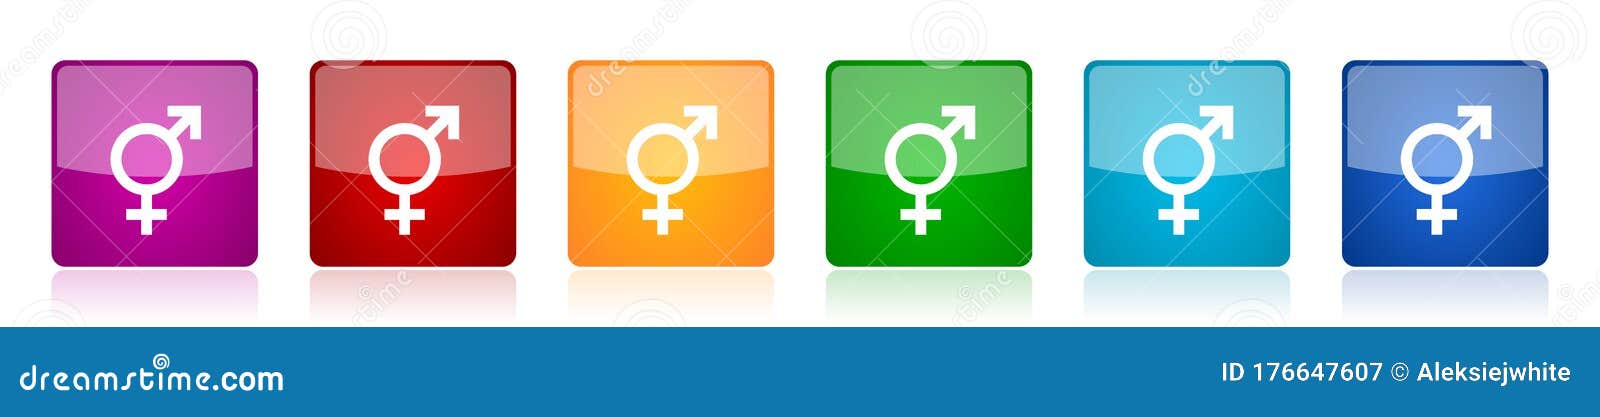 Sex Icon Set Colorful Square Glossy Vector Illustrations In 6 Options